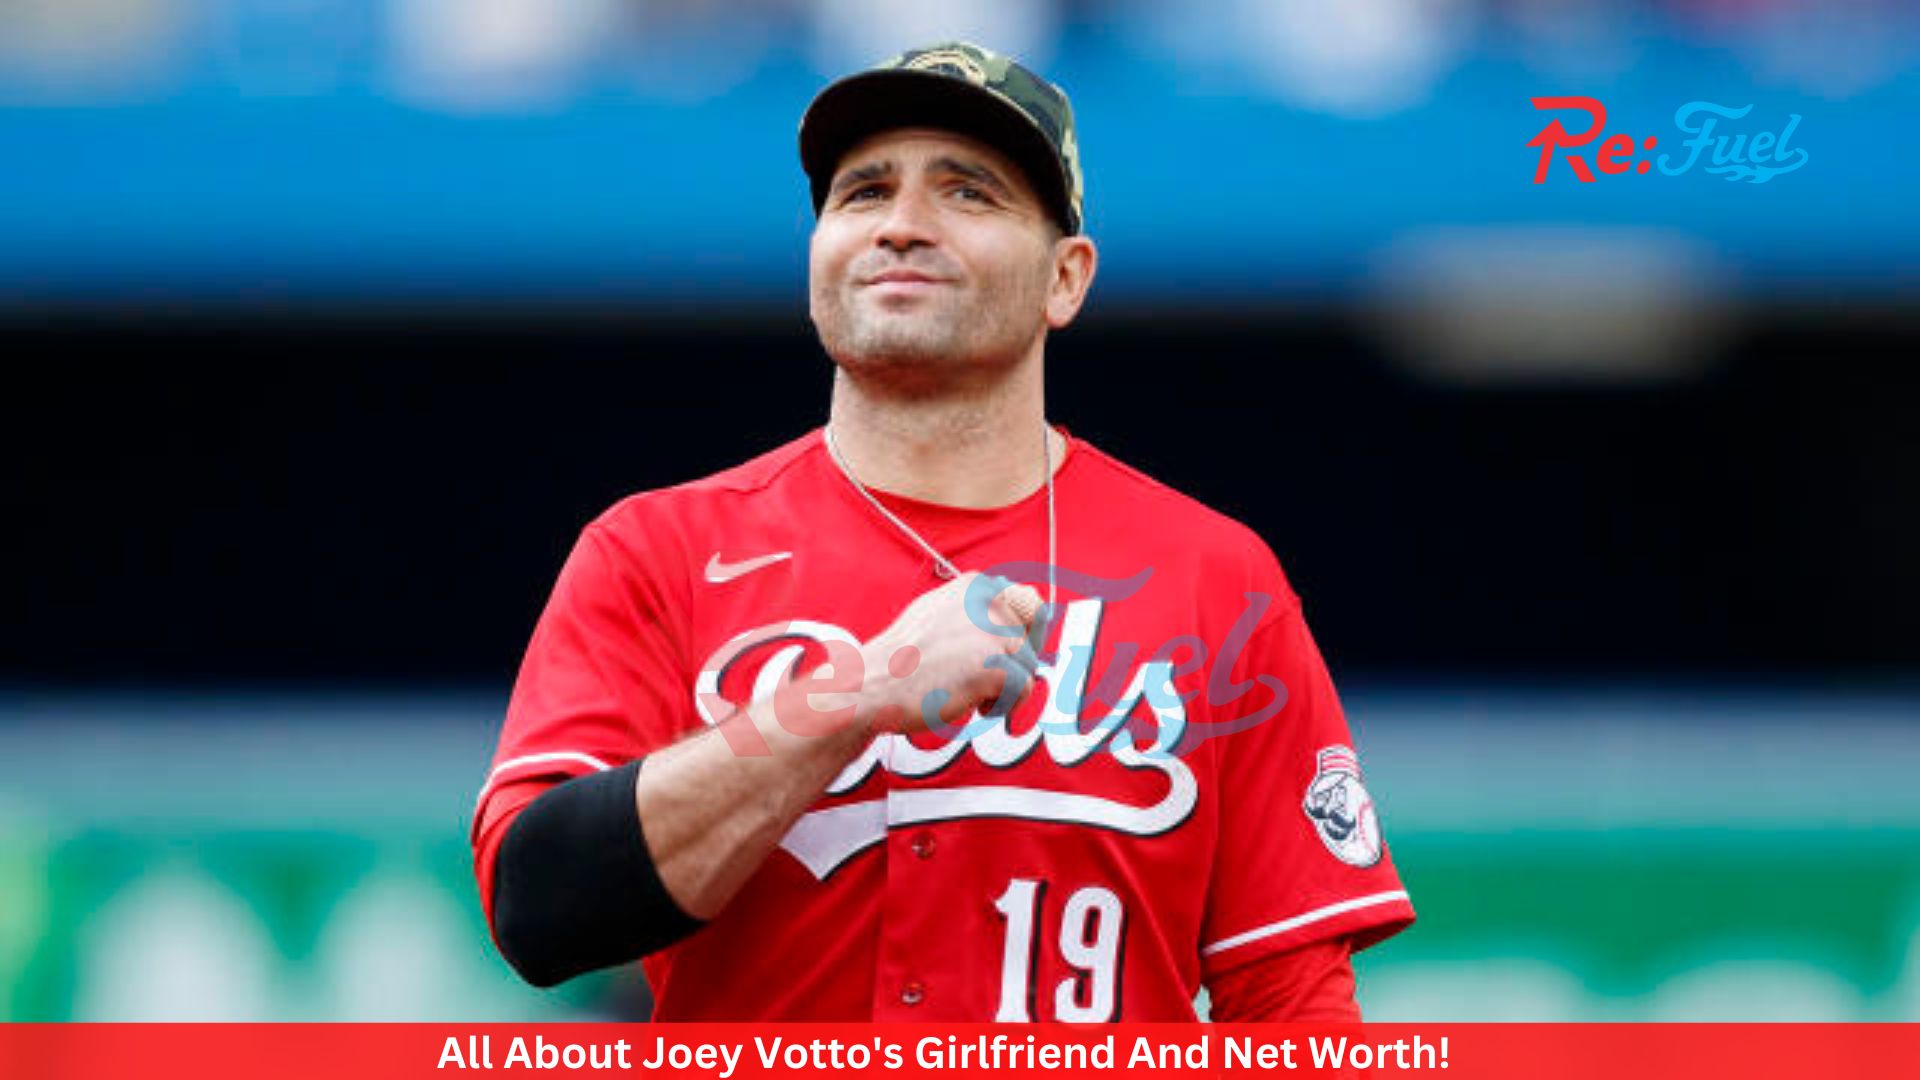 All About Joey Votto's Girlfriend And Net Worth!